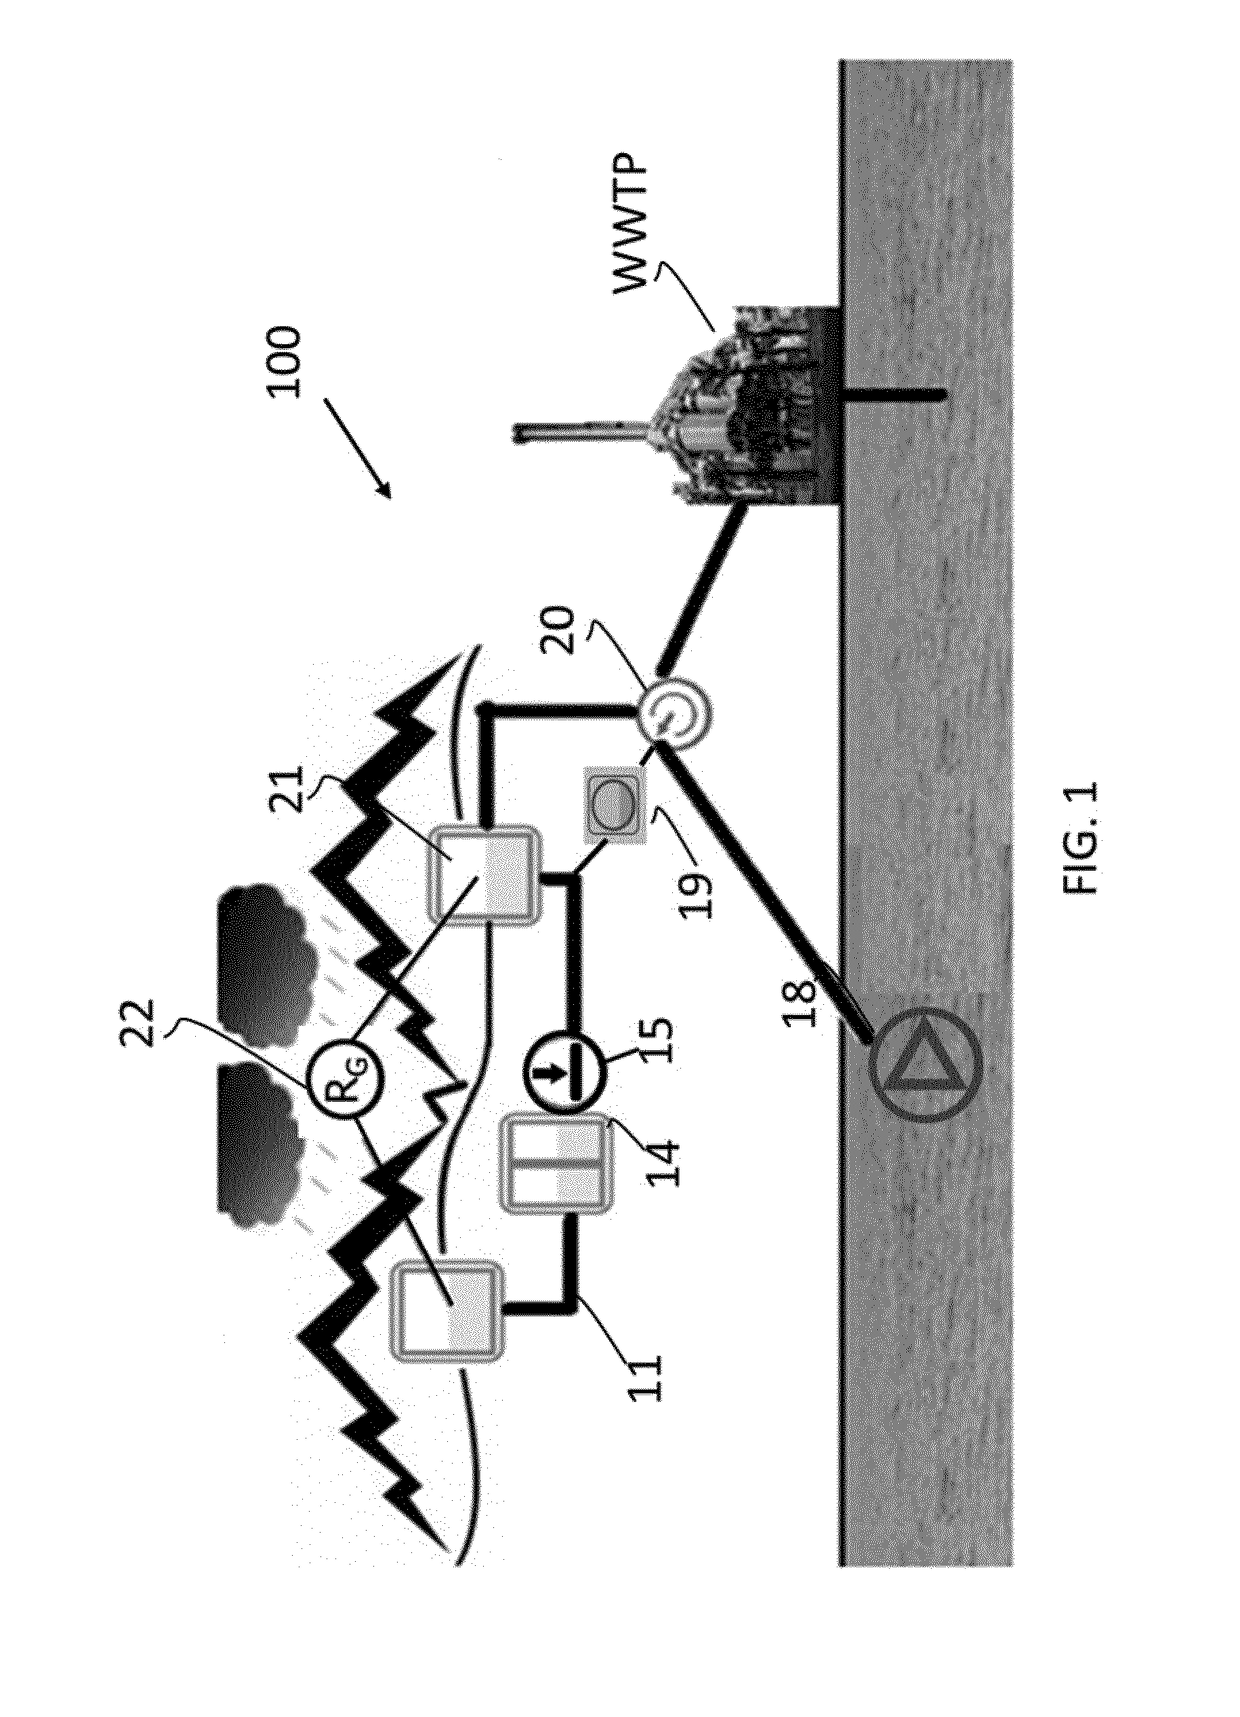 Method for generating control signals adapted to be sent to actuators in a water drainage network